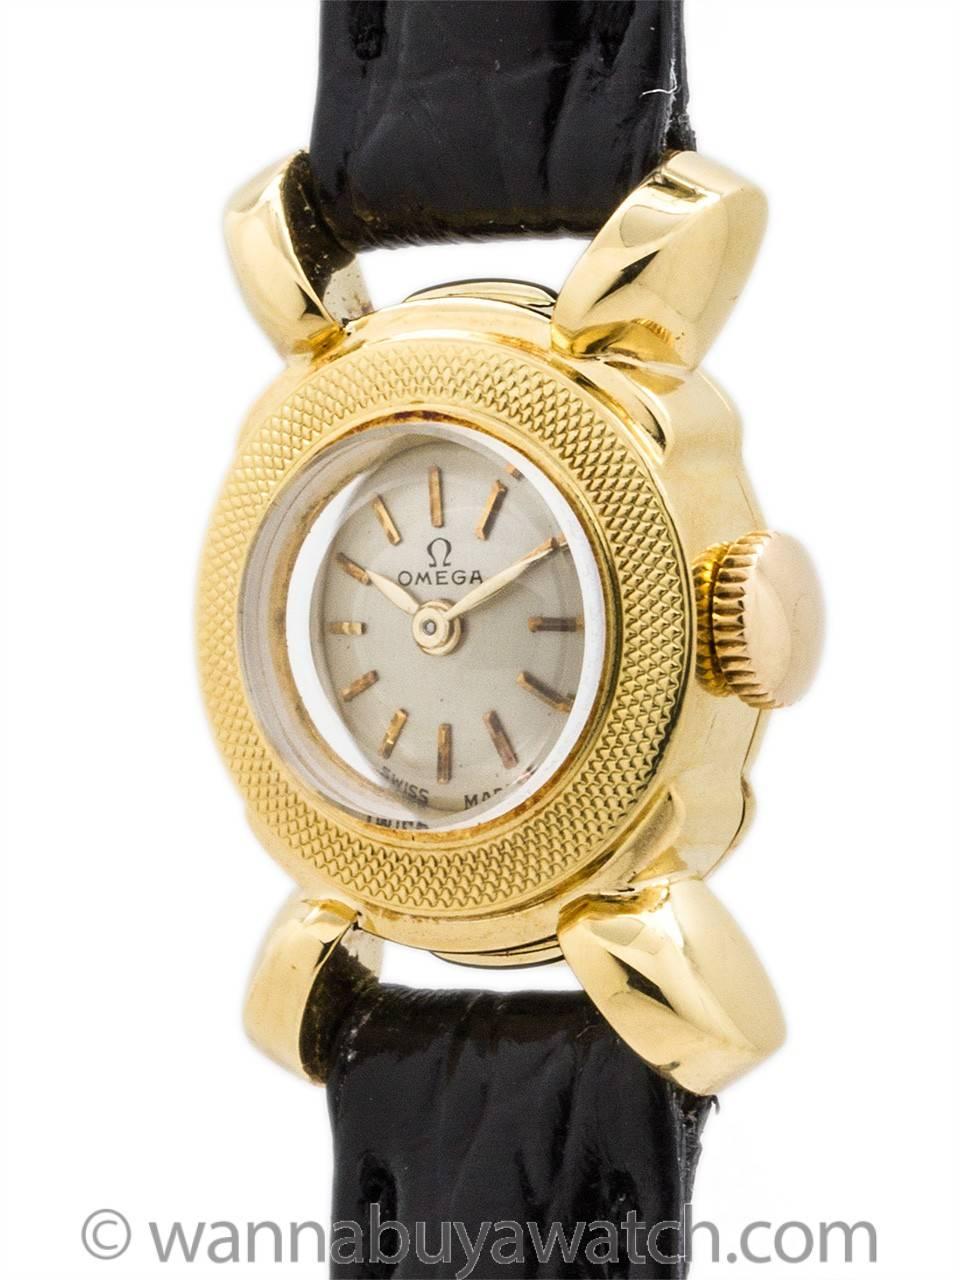 lady Omega manual wind dress watch circa 146. Featuring 15 x 23mm 18K YG case with finely hammered textured bezel, large lobed “ship’s wheel” lugs, original silvered satin dial with applied gold indexes and gilt baton hands. Powered by 17 jewel